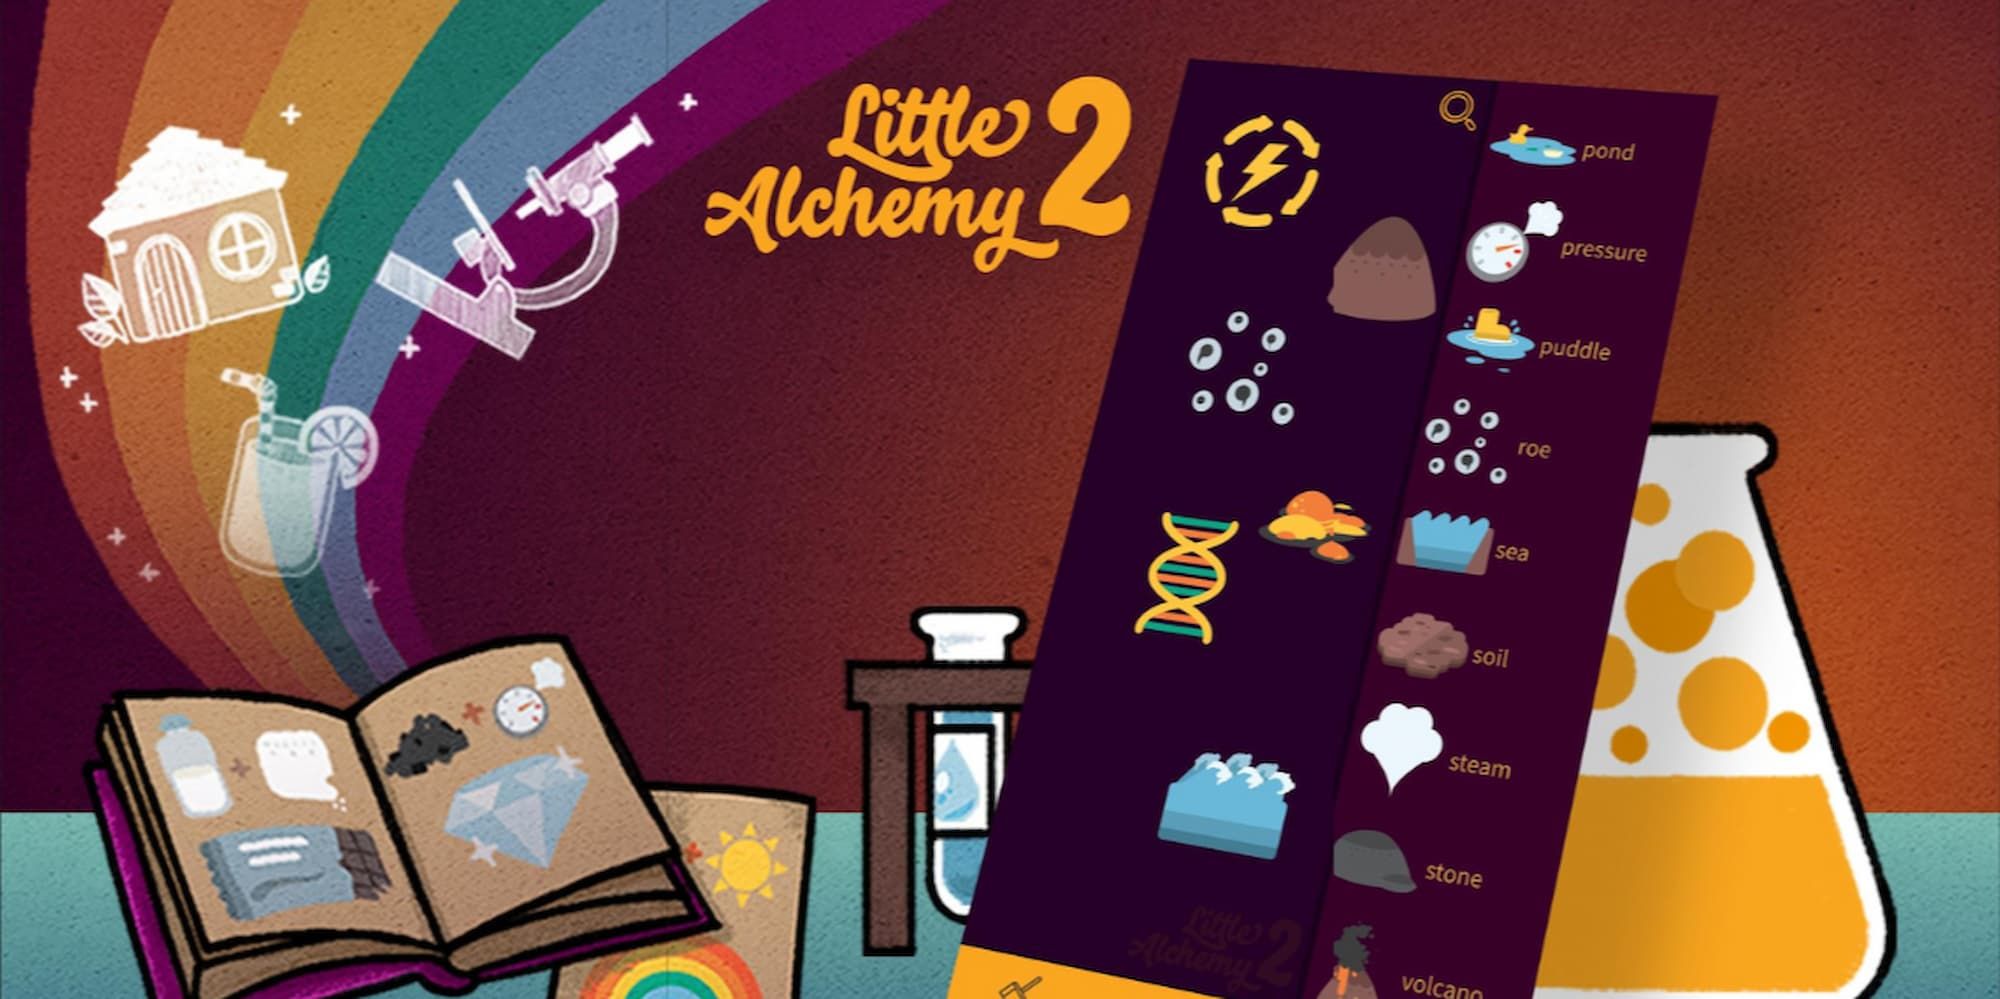 How to Make Time in Little Alchemy 2?